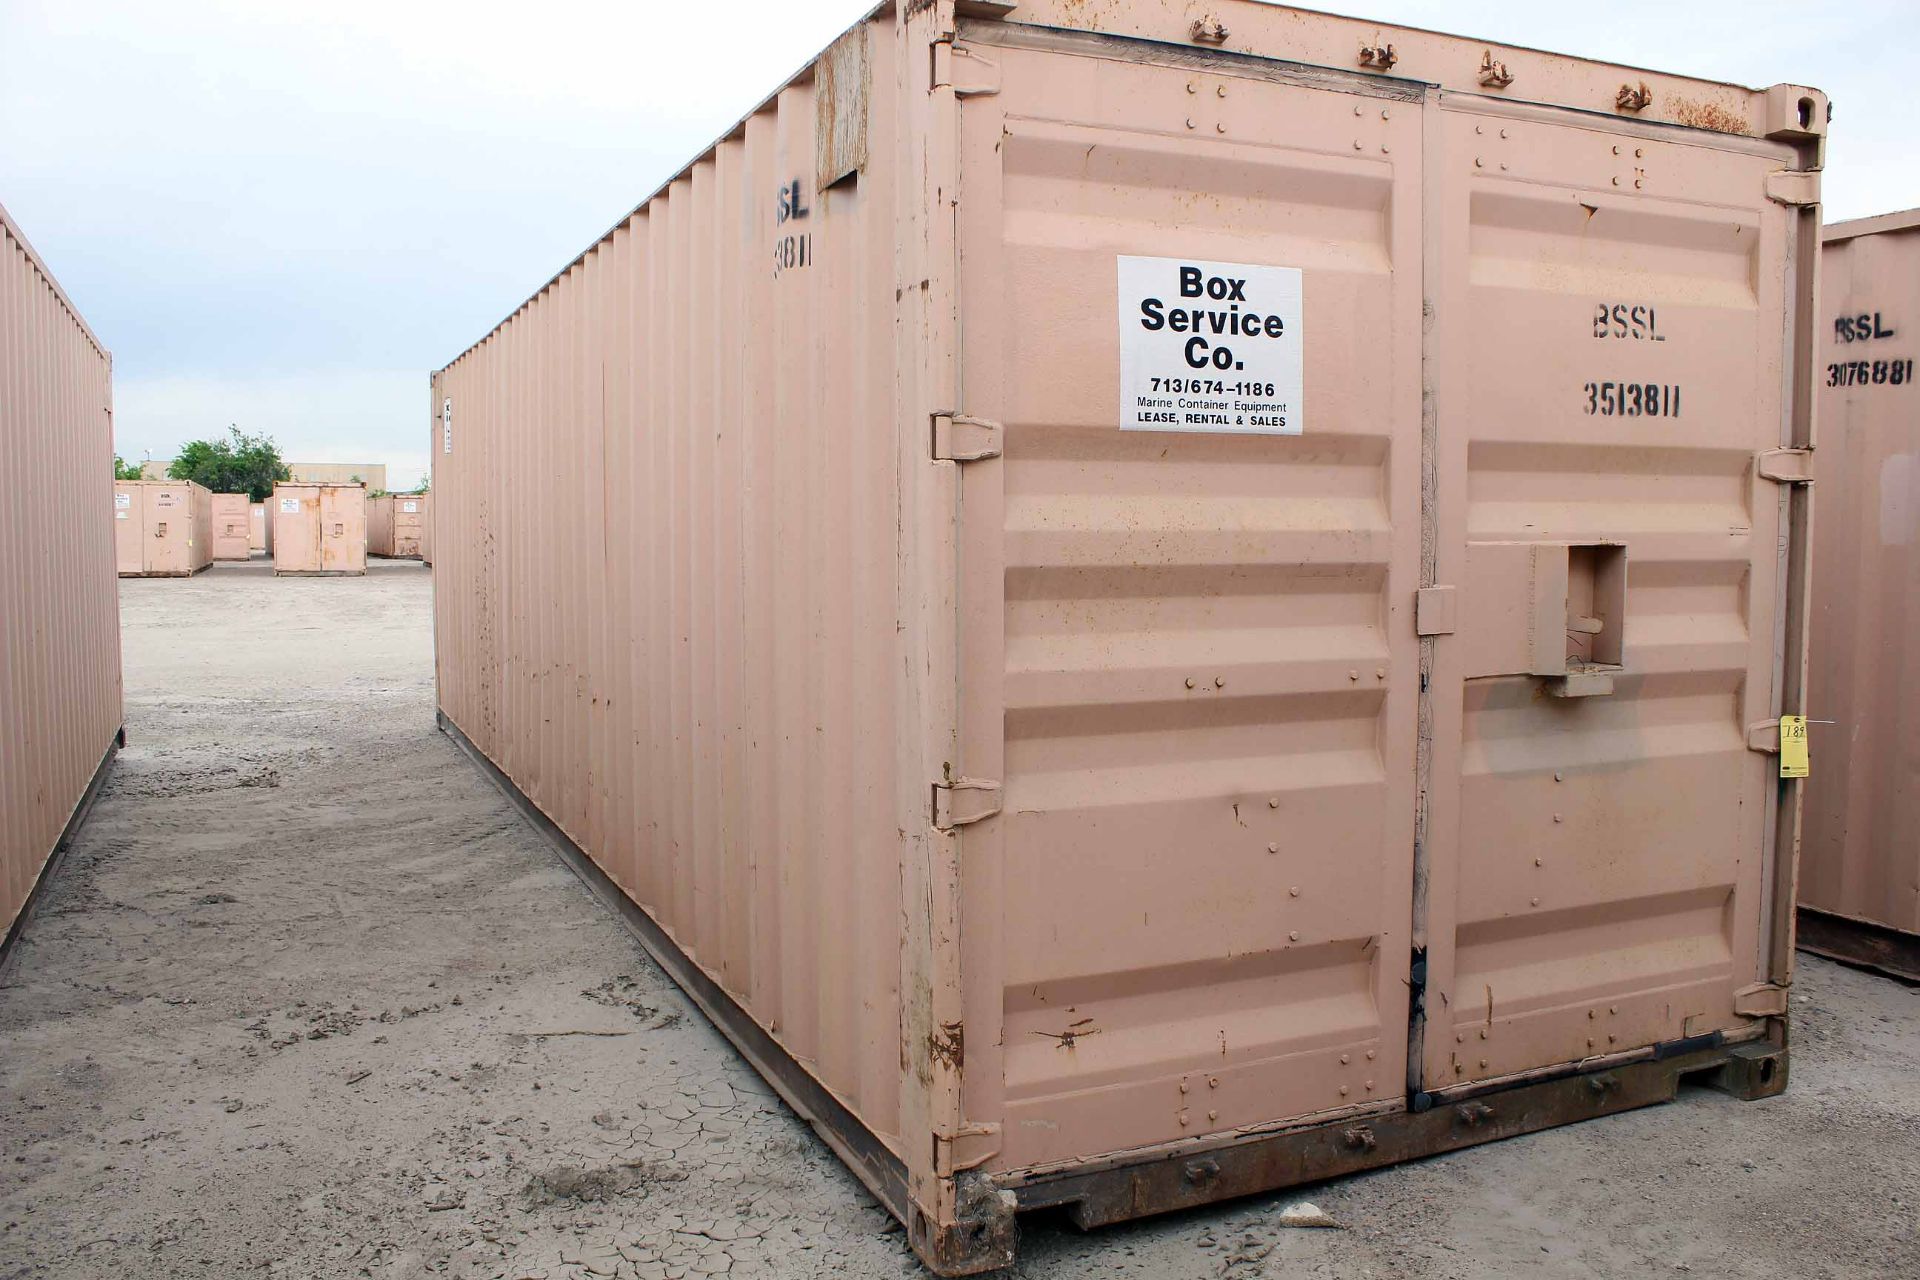 STEEL STORAGE CONTAINER, 30'L. x 96"W. x 8' ht., dbl. swing-out rear doors (Unit BSSL3513811) - Image 2 of 3